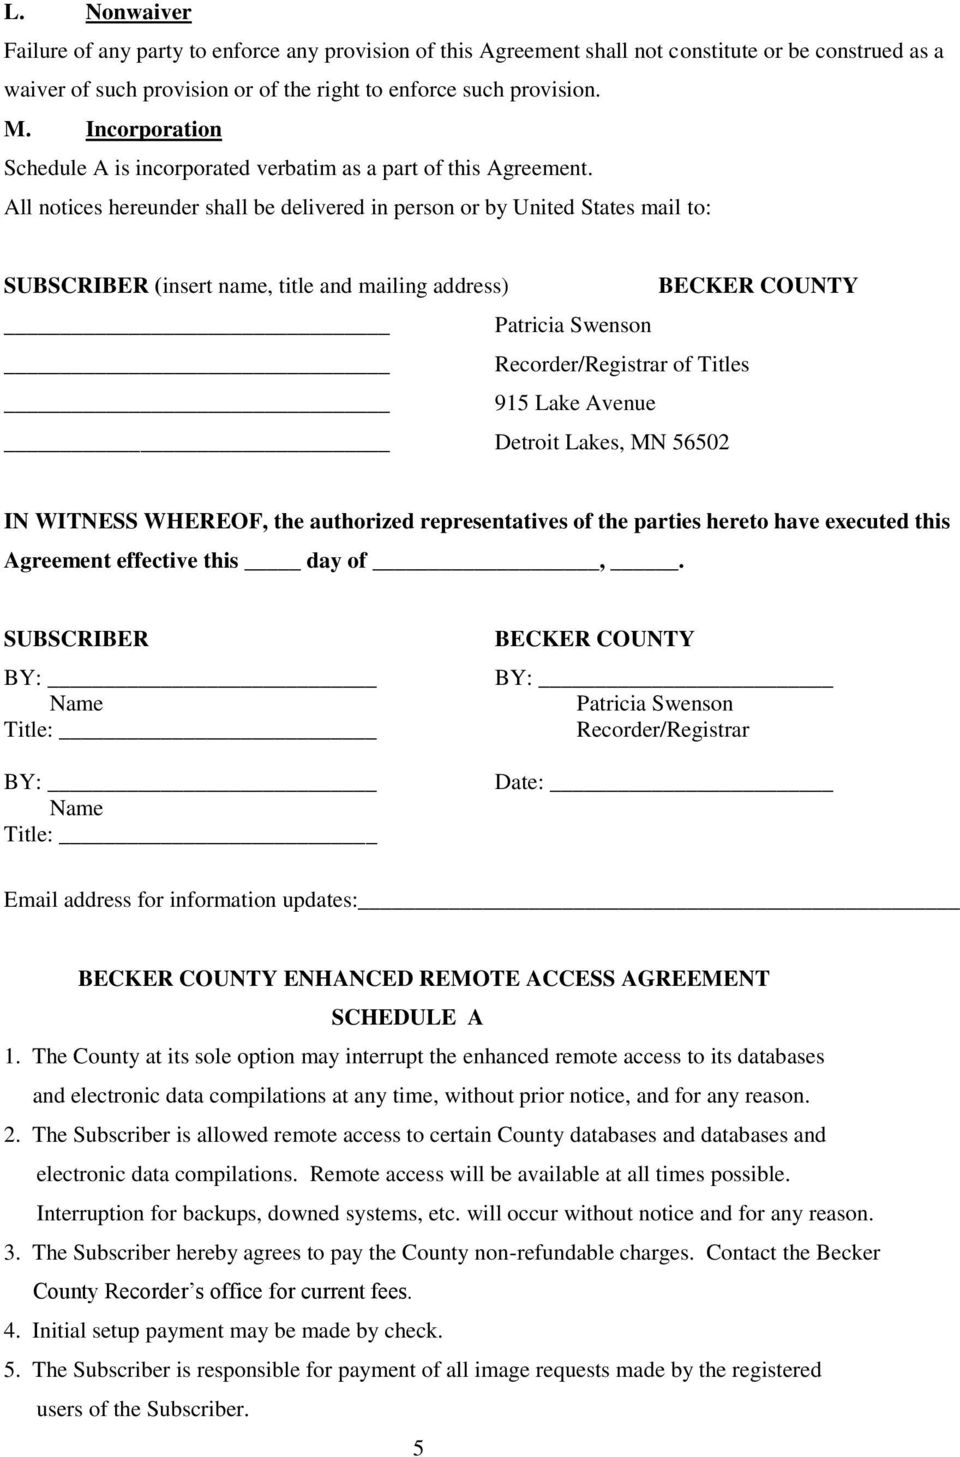 All notices hereunder shall be delivered in person or by United States mail to: SUBSCRIBER (insert name, title and mailing address) BECKER COUNTY Patricia Swenson Recorder/Registrar of Titles 915